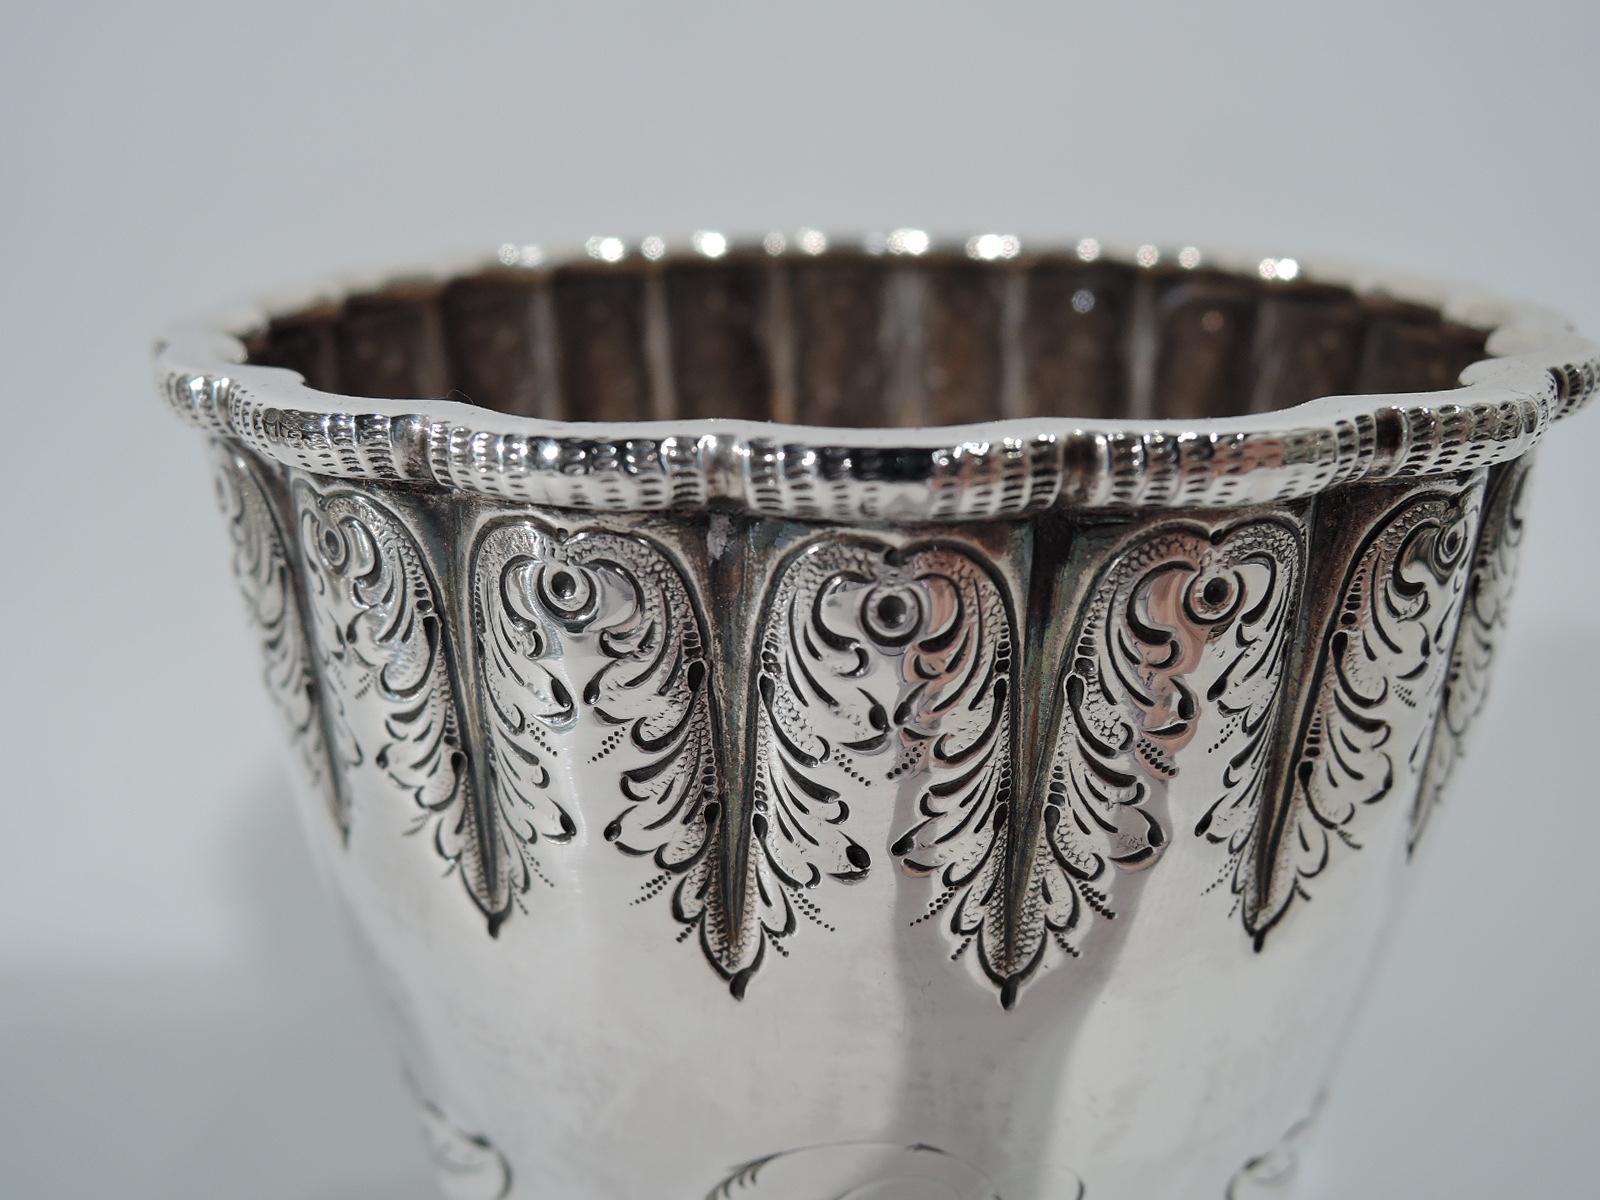 American Antique Tiffany Sterling Silver Goblet with Early Broadway Hallmark